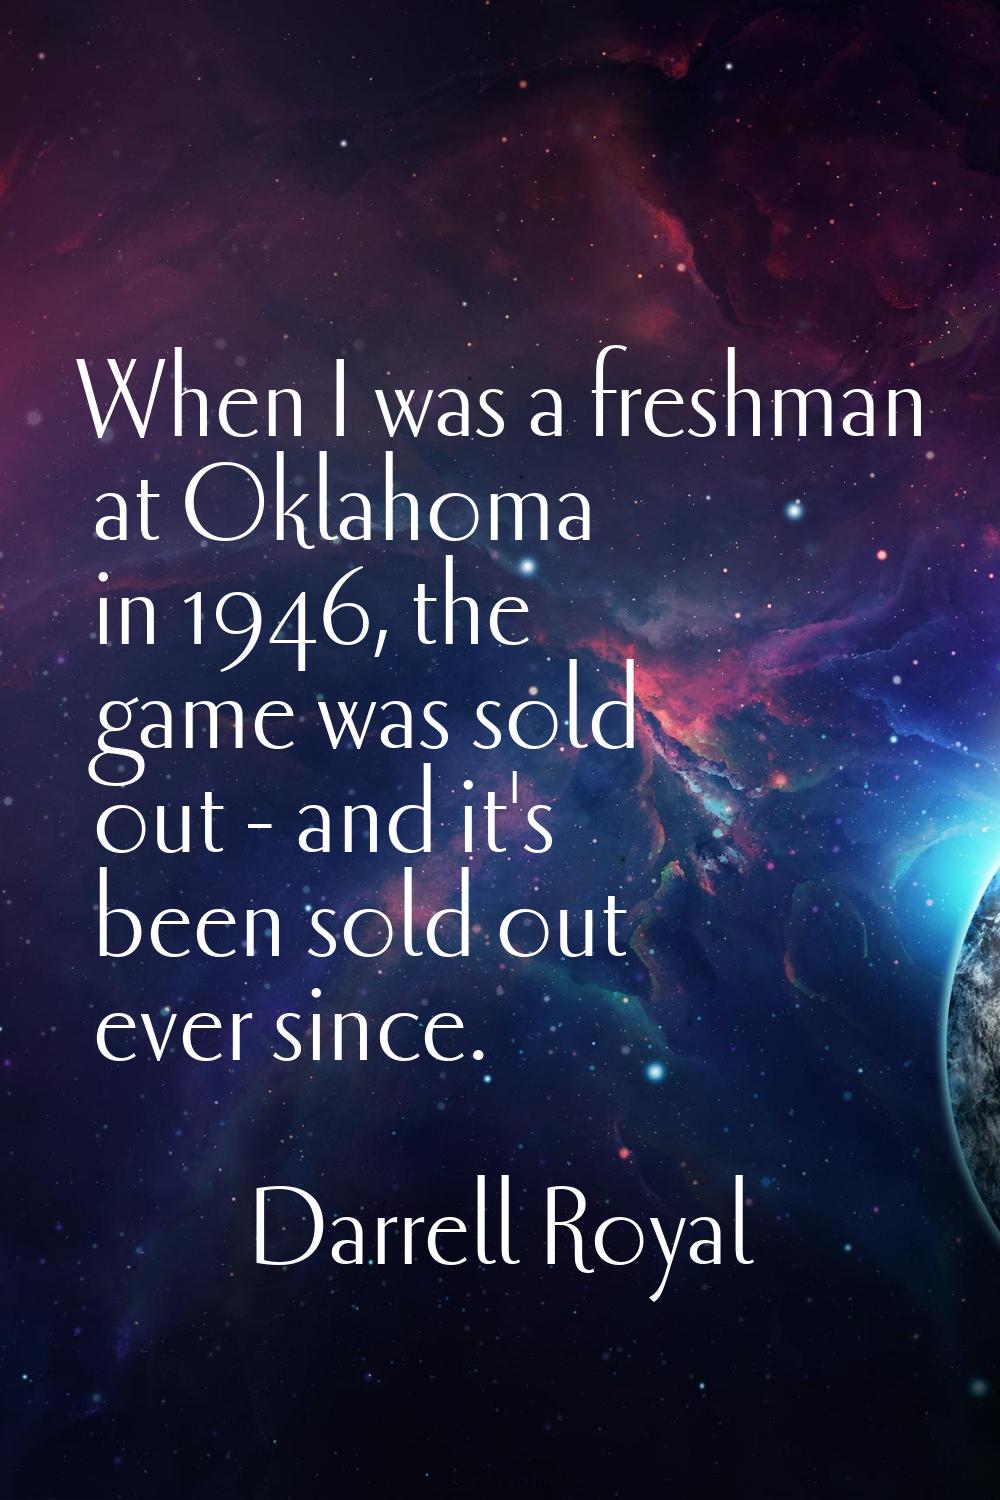 When I was a freshman at Oklahoma in 1946, the game was sold out - and it's been sold out ever sinc